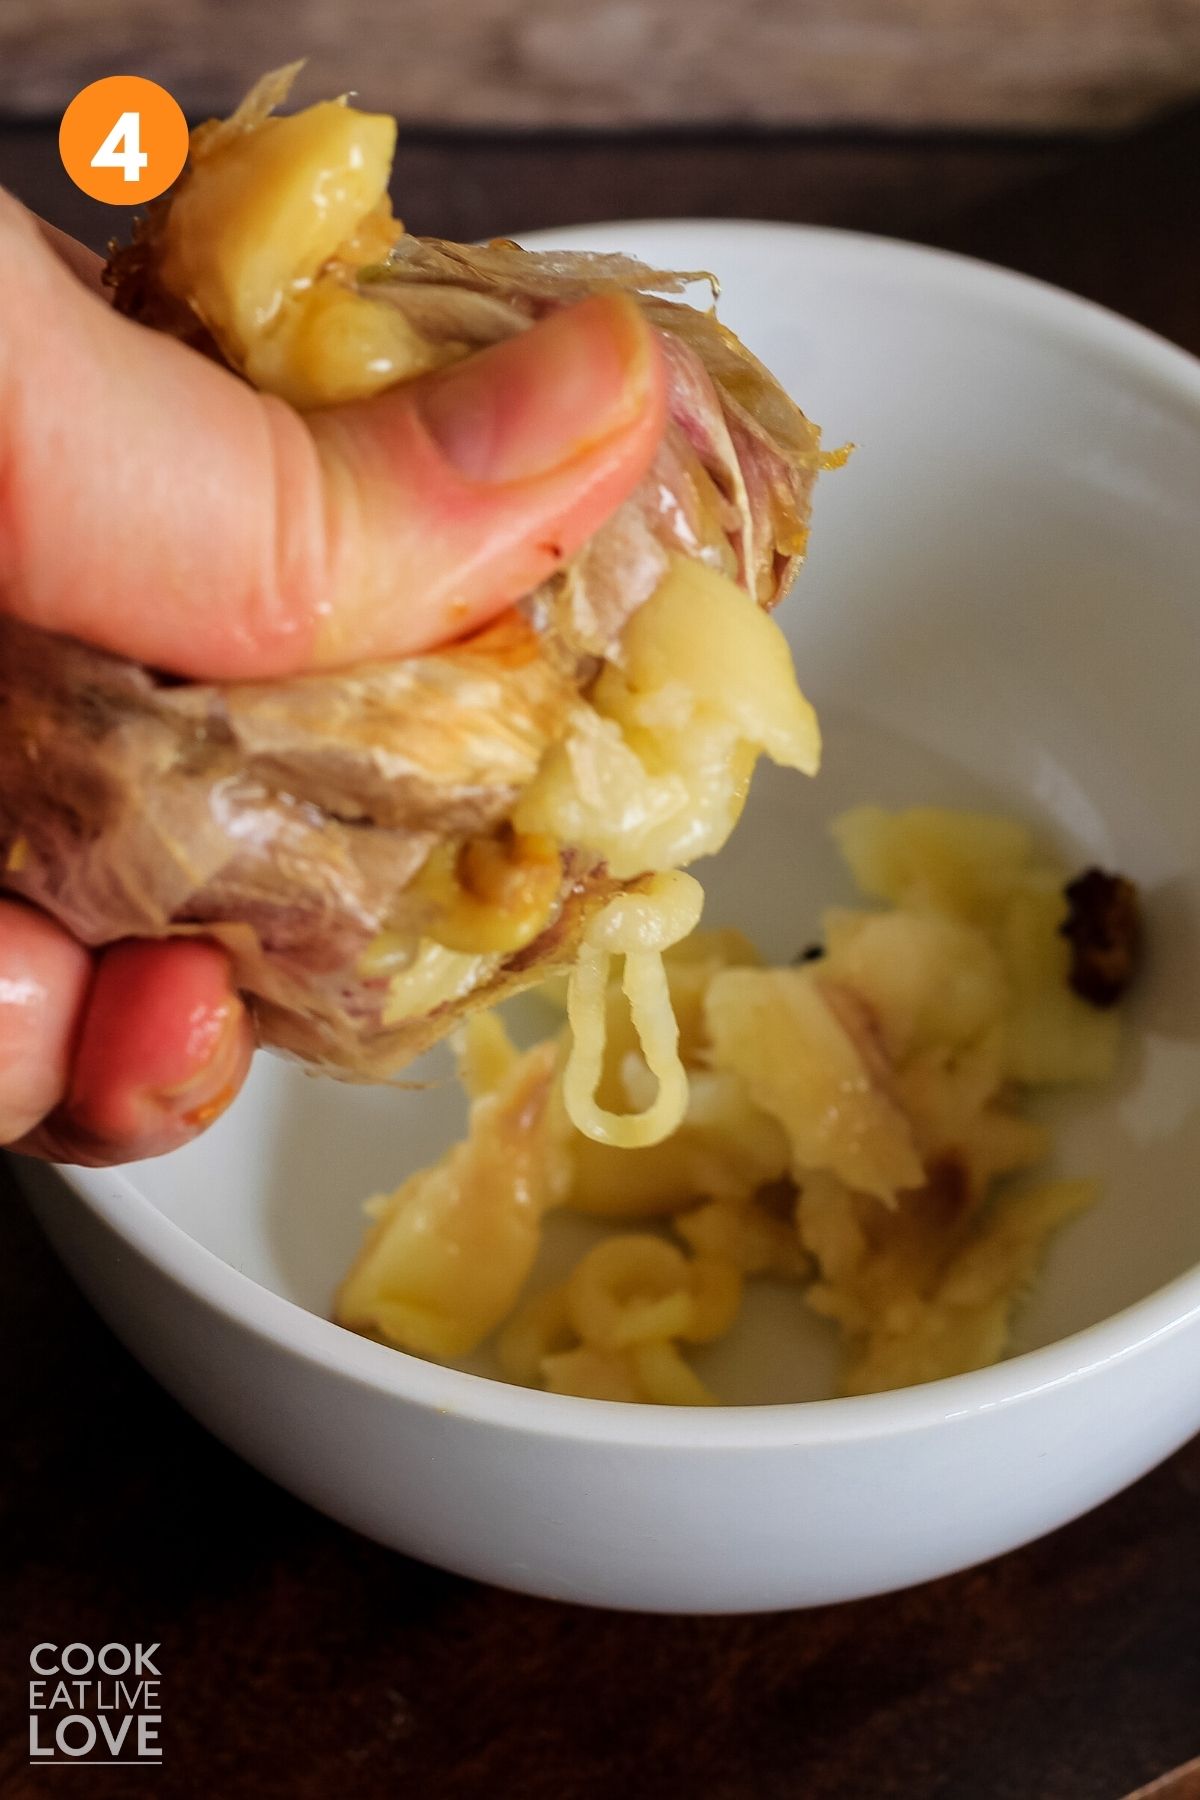 Hand is squeezing roasted garlic from the cooked head.